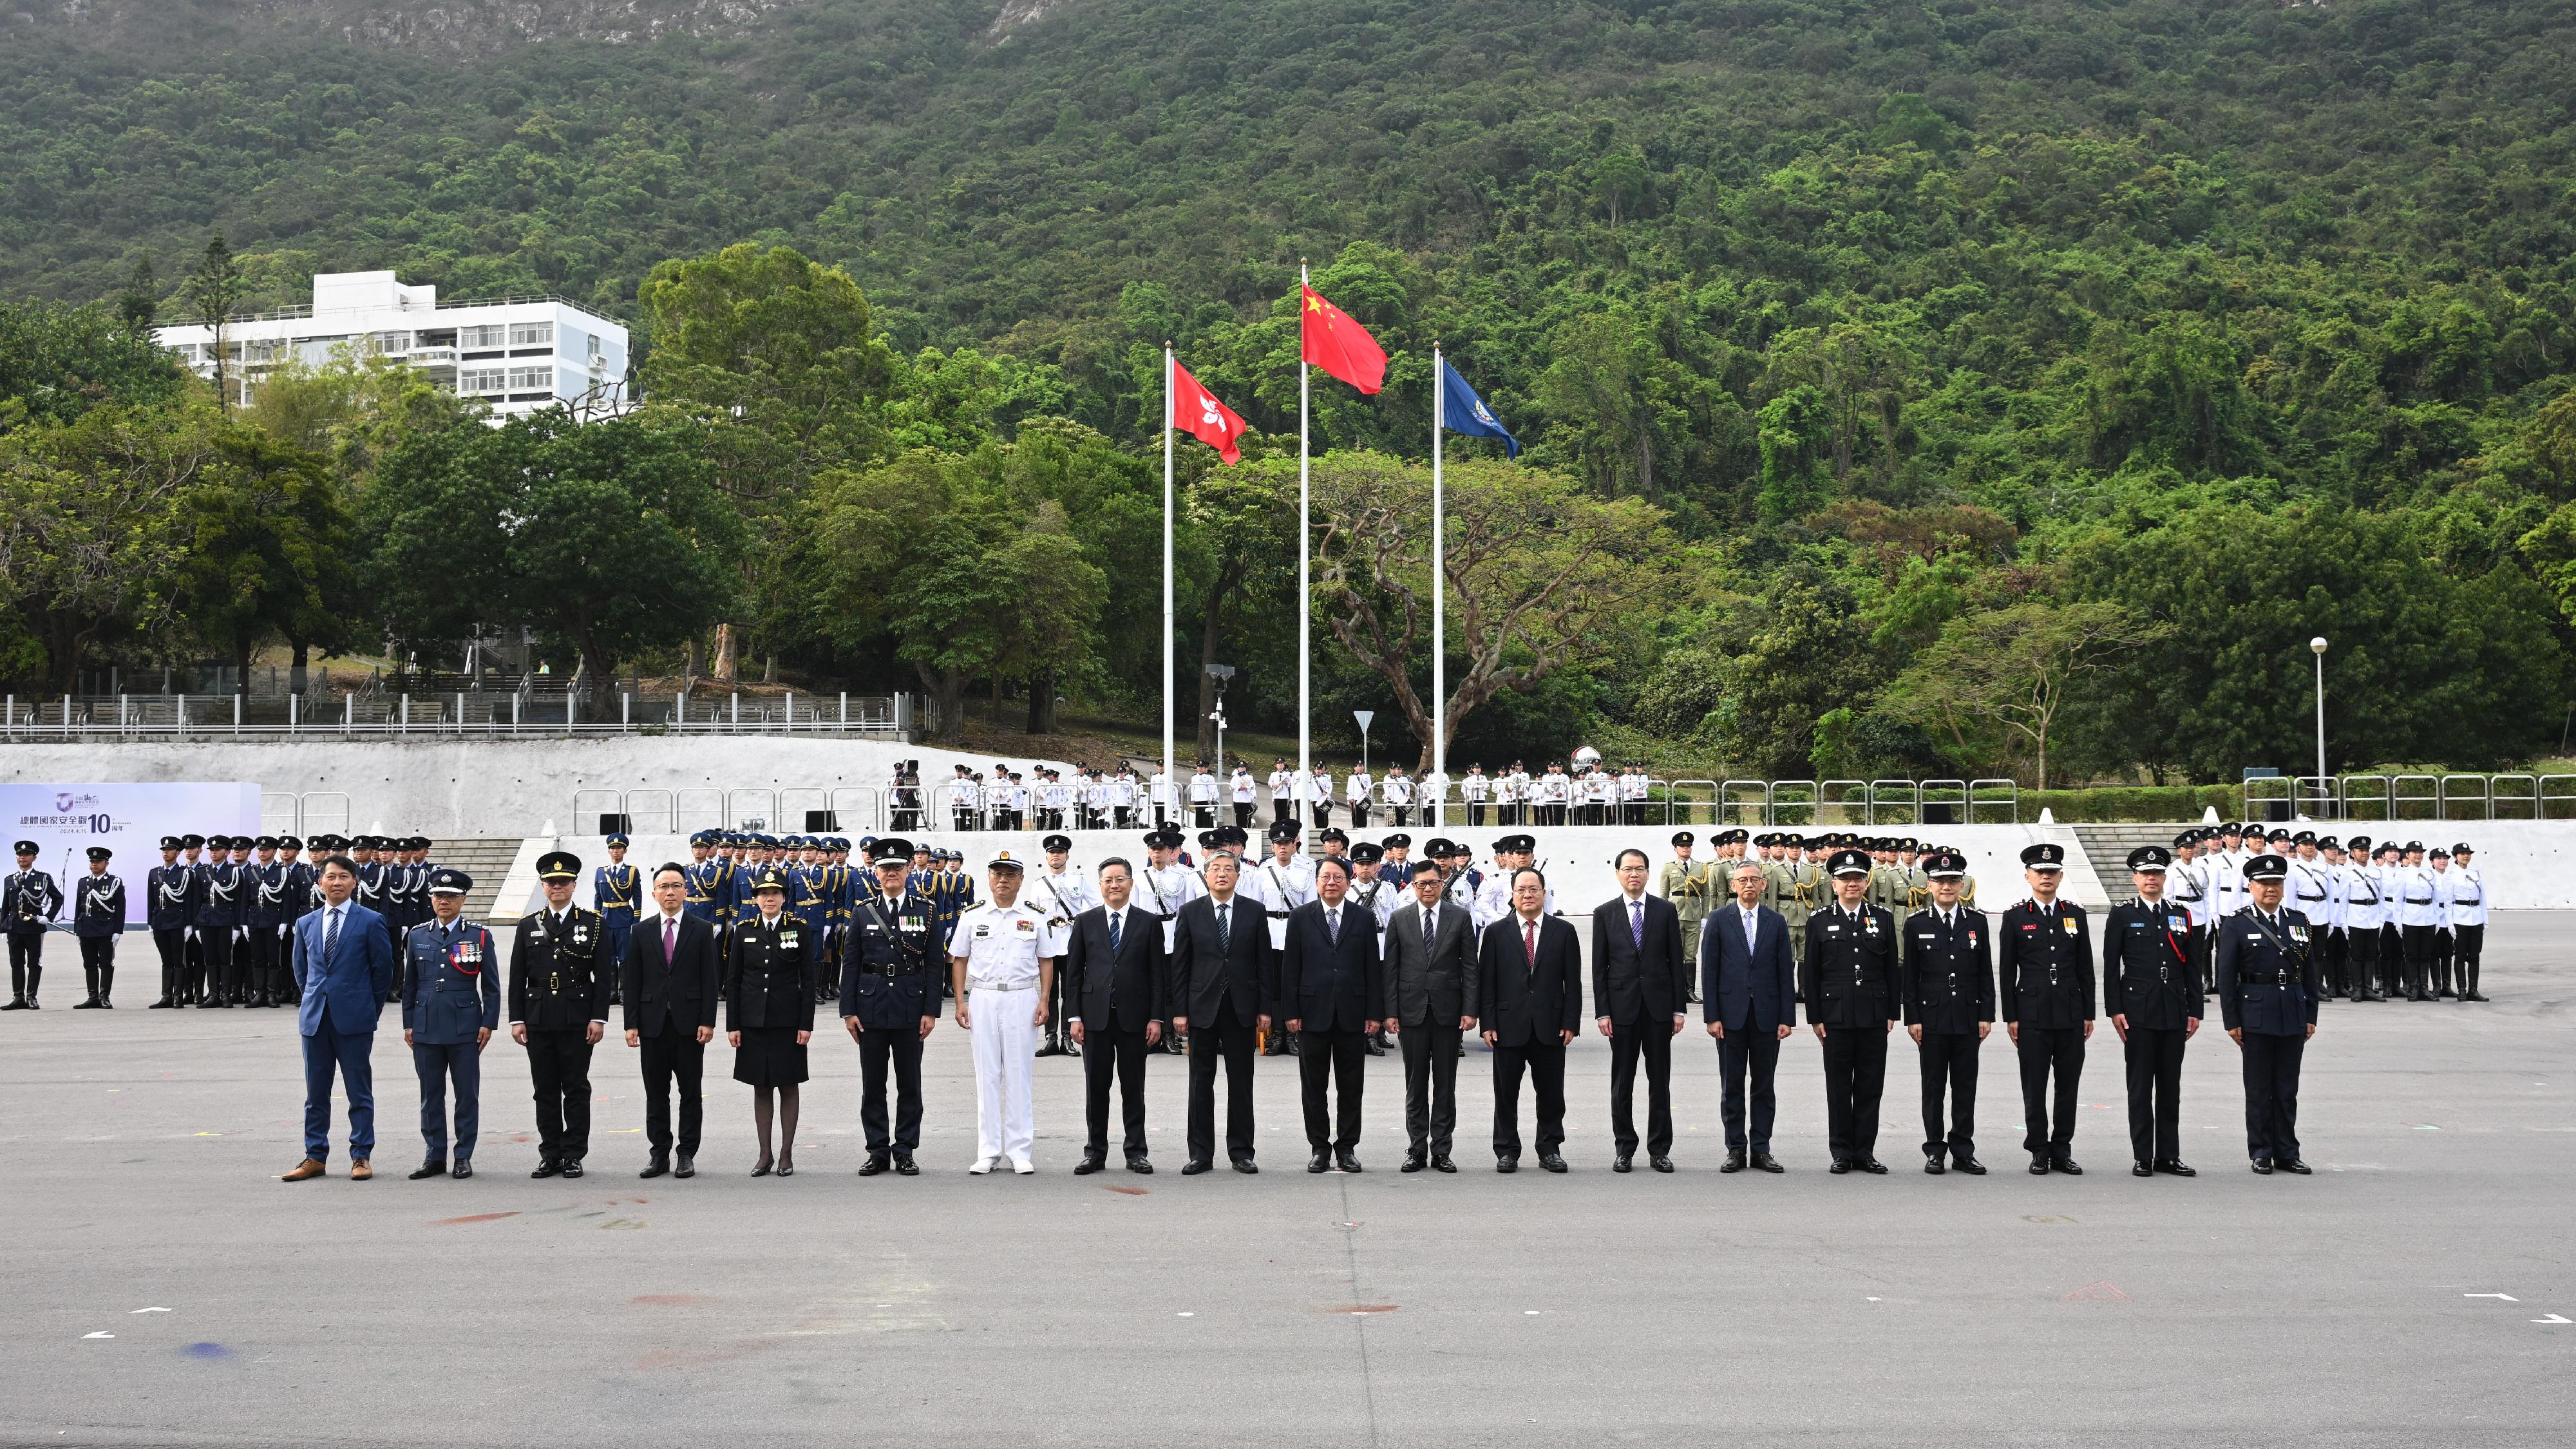 The Chief Secretary for Administration, Mr Chan Kwok-ki, attended the National Security Education Day flag raising ceremony today (April 15). Photo shows (from seventh left) the Deputy Chief of Staff of the Chinese People's Liberation Army Hong Kong Garrison, Senior Colonel Liu Zhaohui; Deputy Head of the Office for Safeguarding National Security of the Central People's Government in the Hong Kong Special Administrative Region (HKSAR) Mr Li Jiangzhou; Deputy Director of the Liaison Office of the Central People's Government in the HKSAR Mr Luo Yonggang; Mr Chan; the Secretary for Security, Mr Tang Ping-keung; Deputy Commissioner of the Office of the Commissioner of the Ministry of Foreign Affairs of the People's Republic of China in the HKSAR Mr Pan Yundong; the Secretary General of the Committee for Safeguarding National Security of the HKSAR, Mr Sonny Au; and heads of disciplined services departments and other officiating guests at the ceremony.